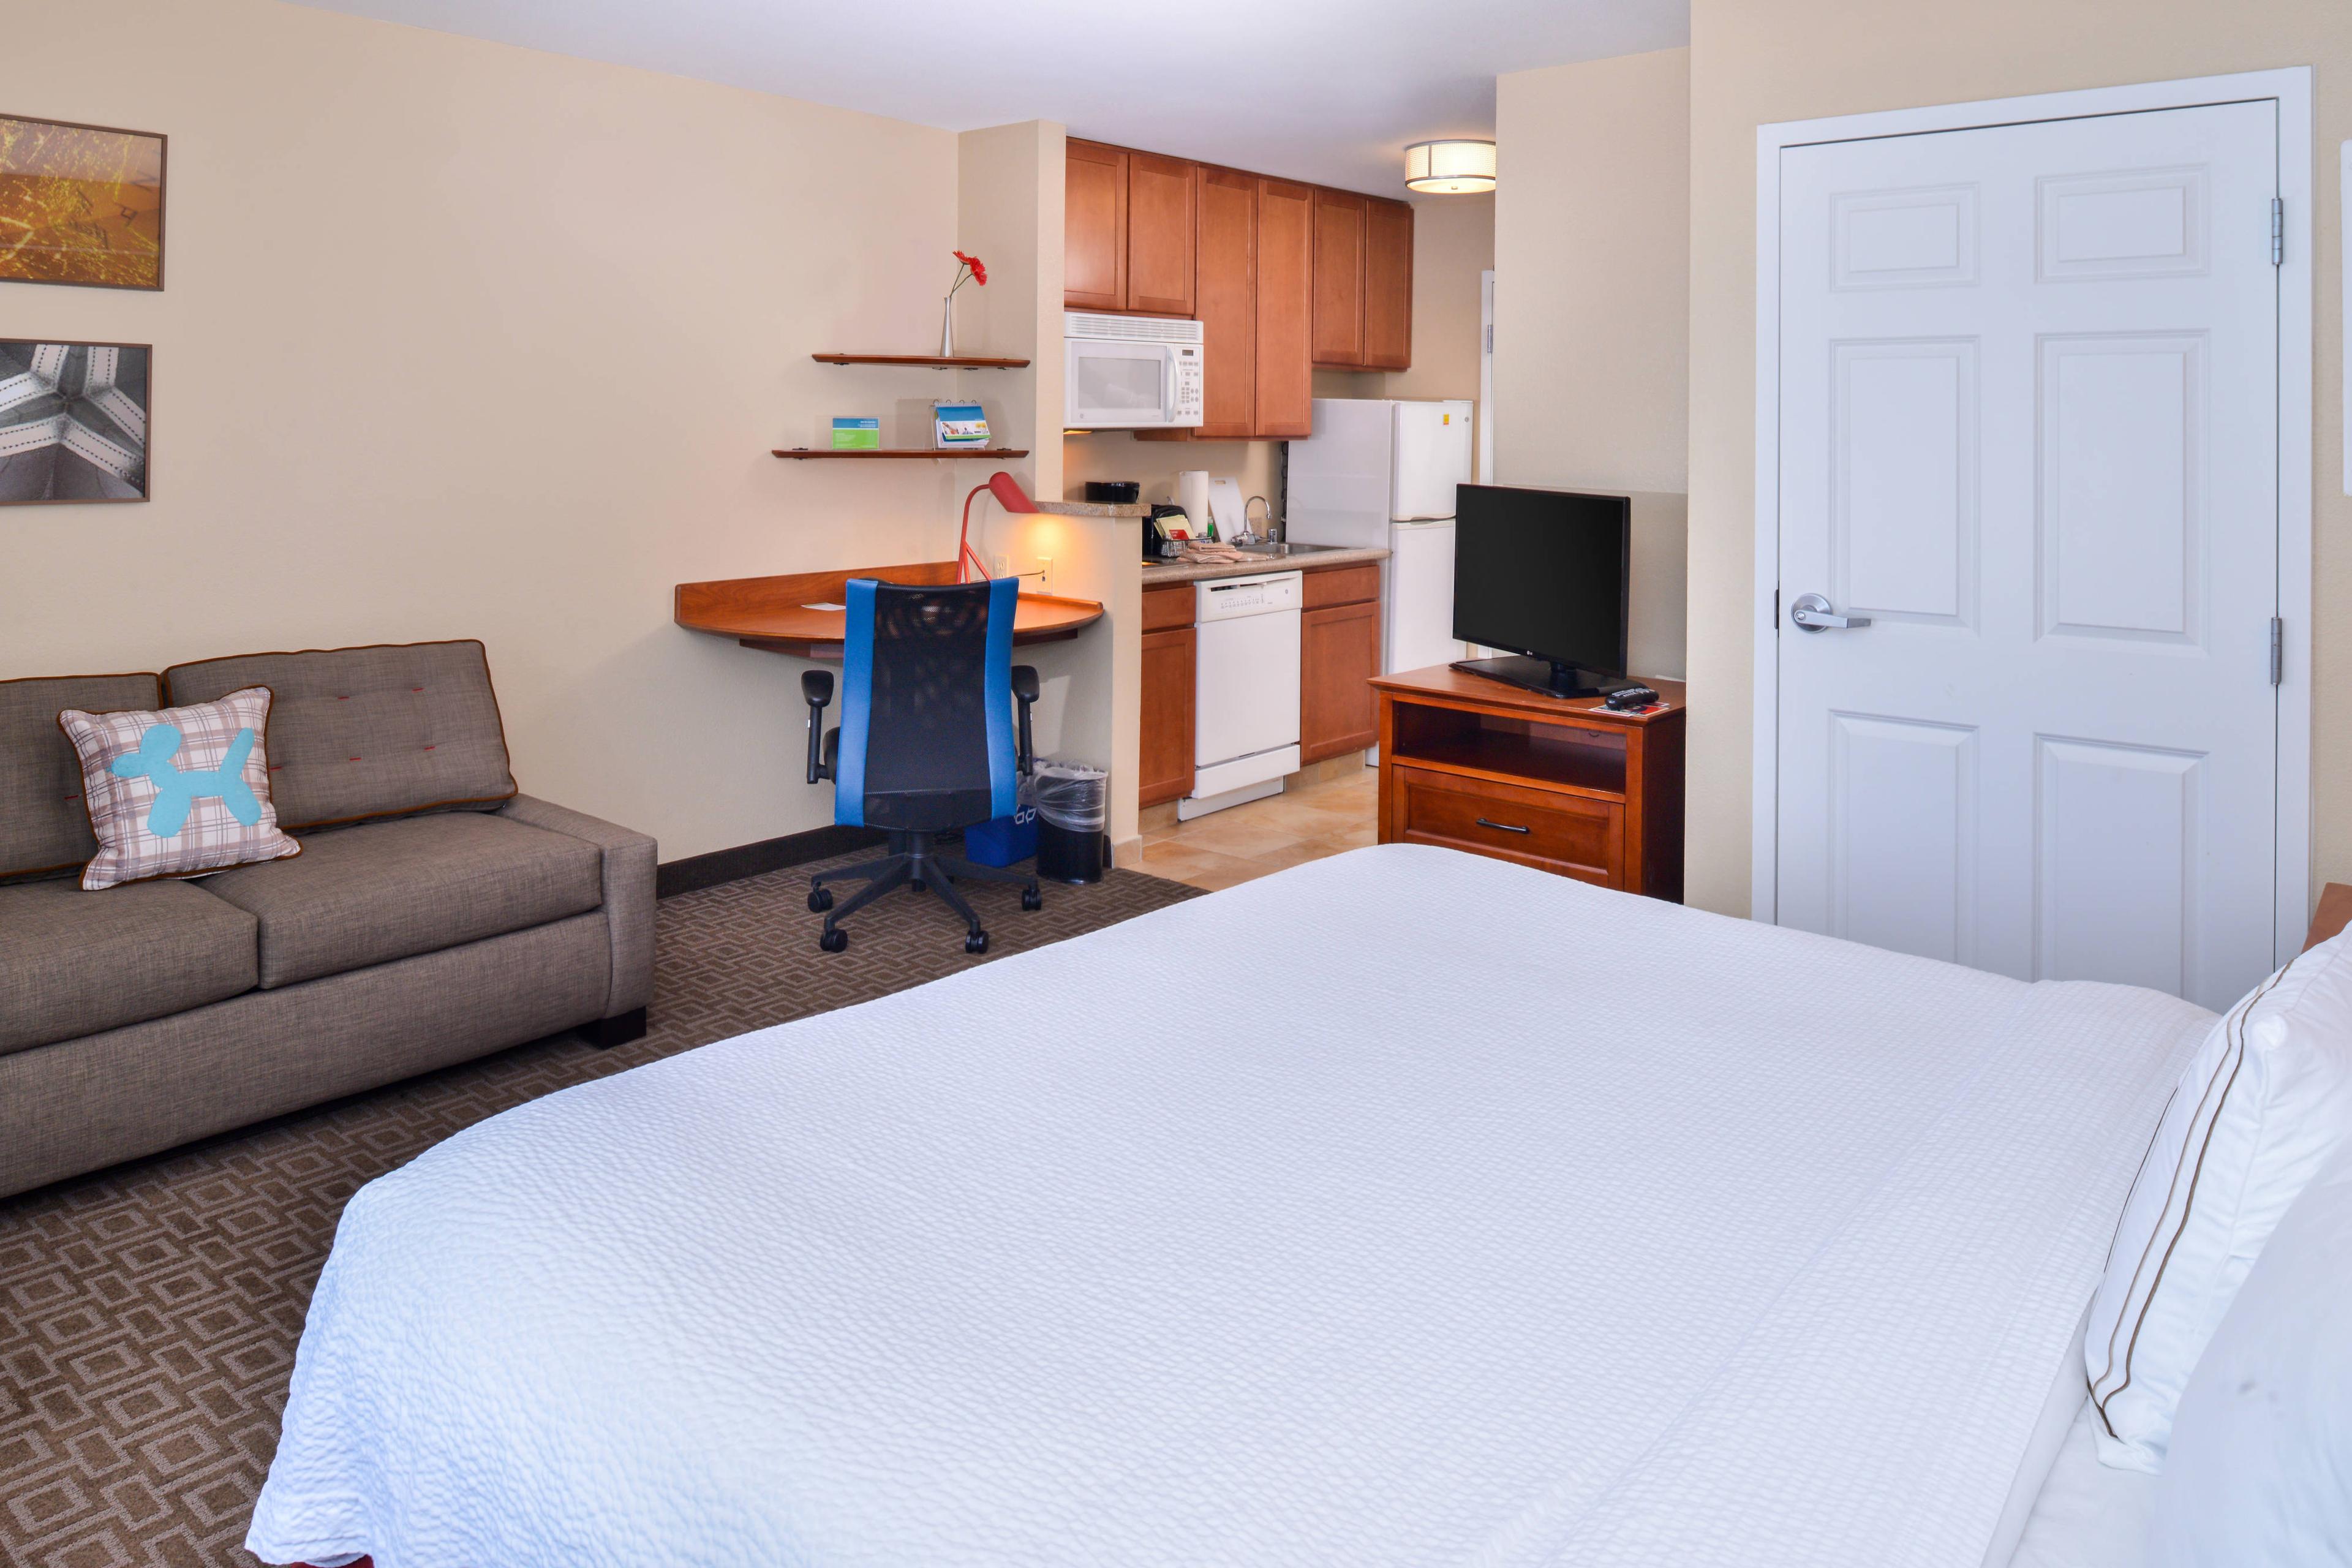 You'll find all the conveniences of home in our Studio King Suites. Our suites come with a full kitchen that includes a full-size refrigerator, microwave, dishwasher, and stove top, plus plenty of space to spread out.